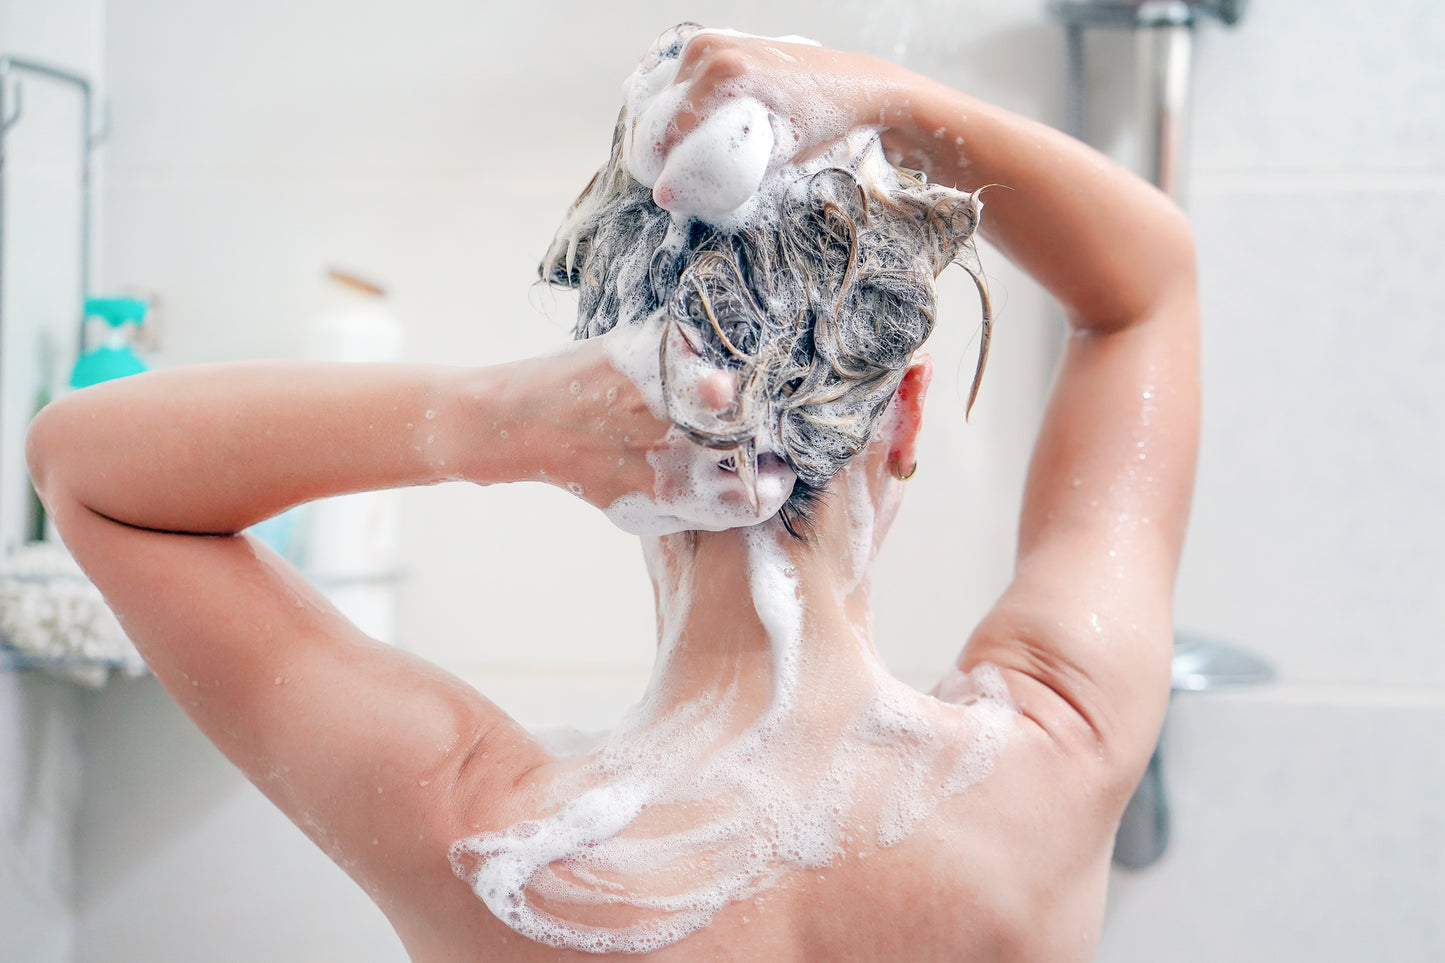 The Ultimate Guide: Why Choose a Sulfate-Free Shampoo?